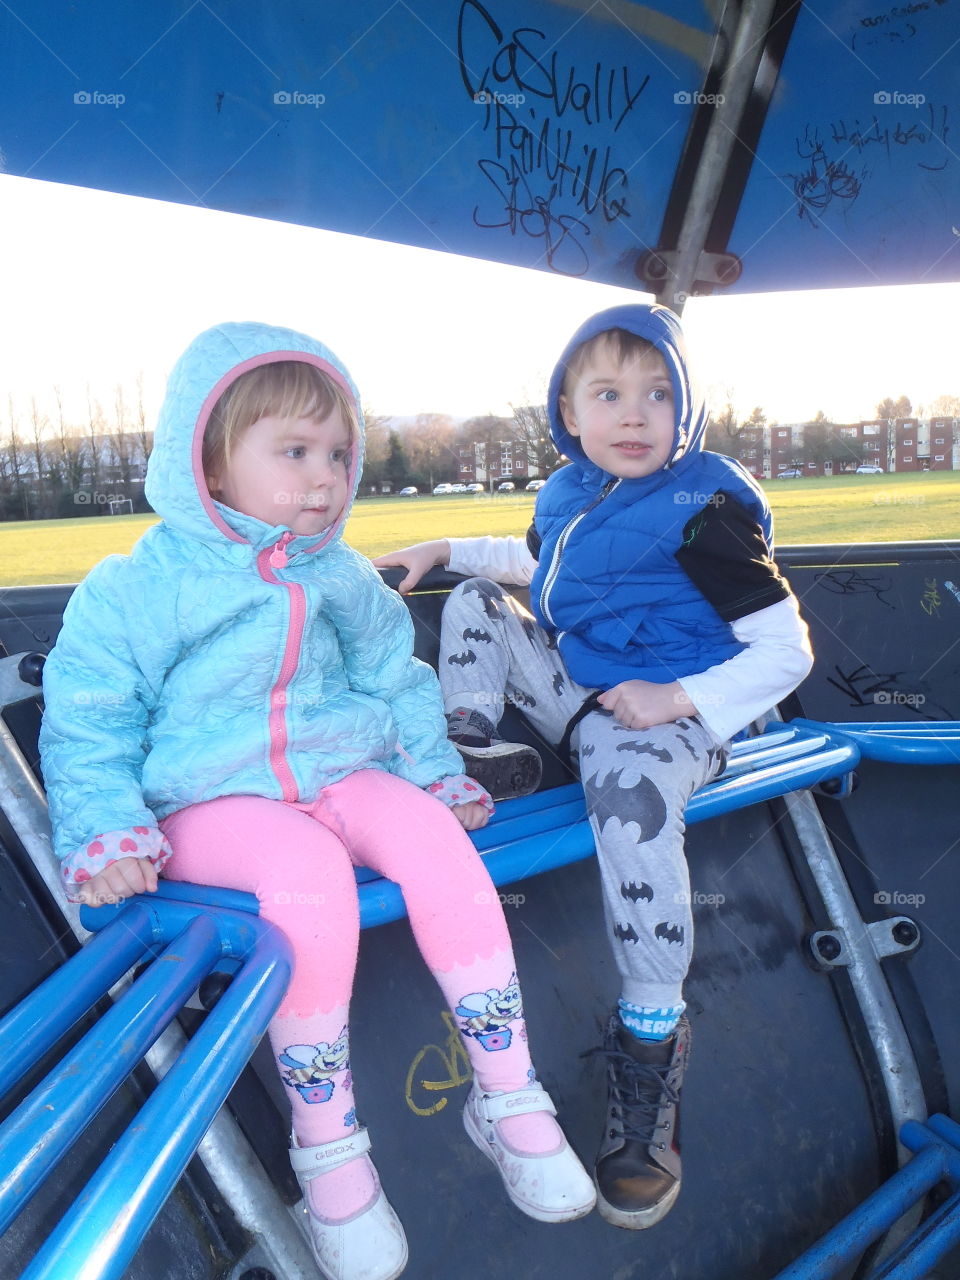 Brother and sister sitting in park